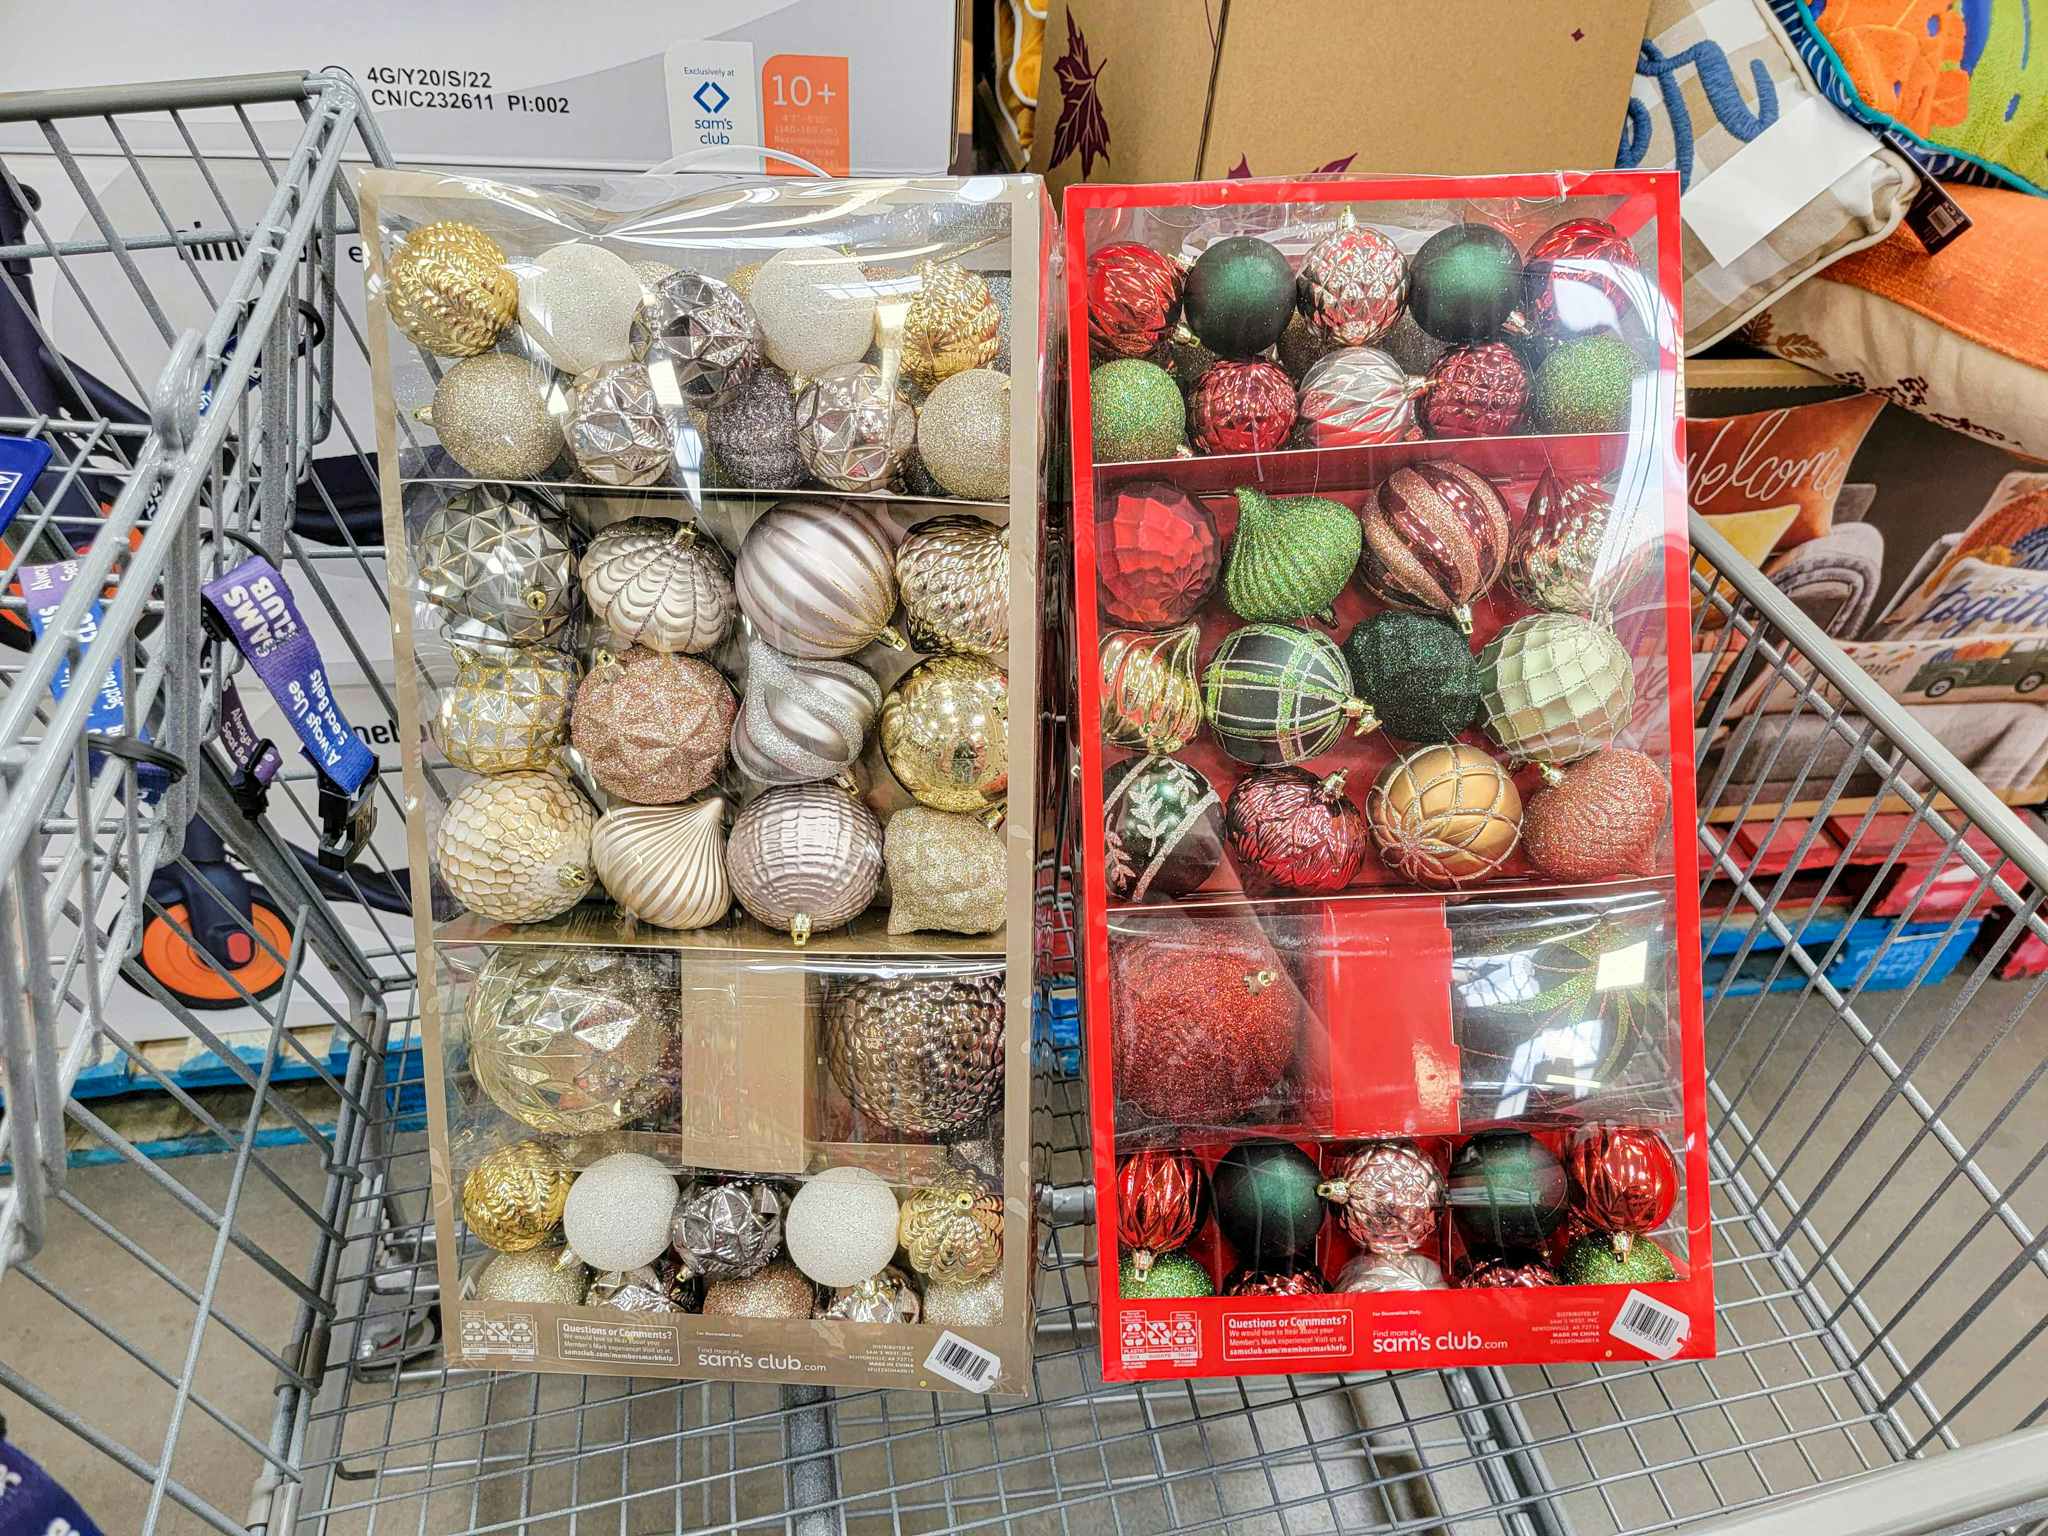 2 huge packs of christmas tree ornaments in a cart